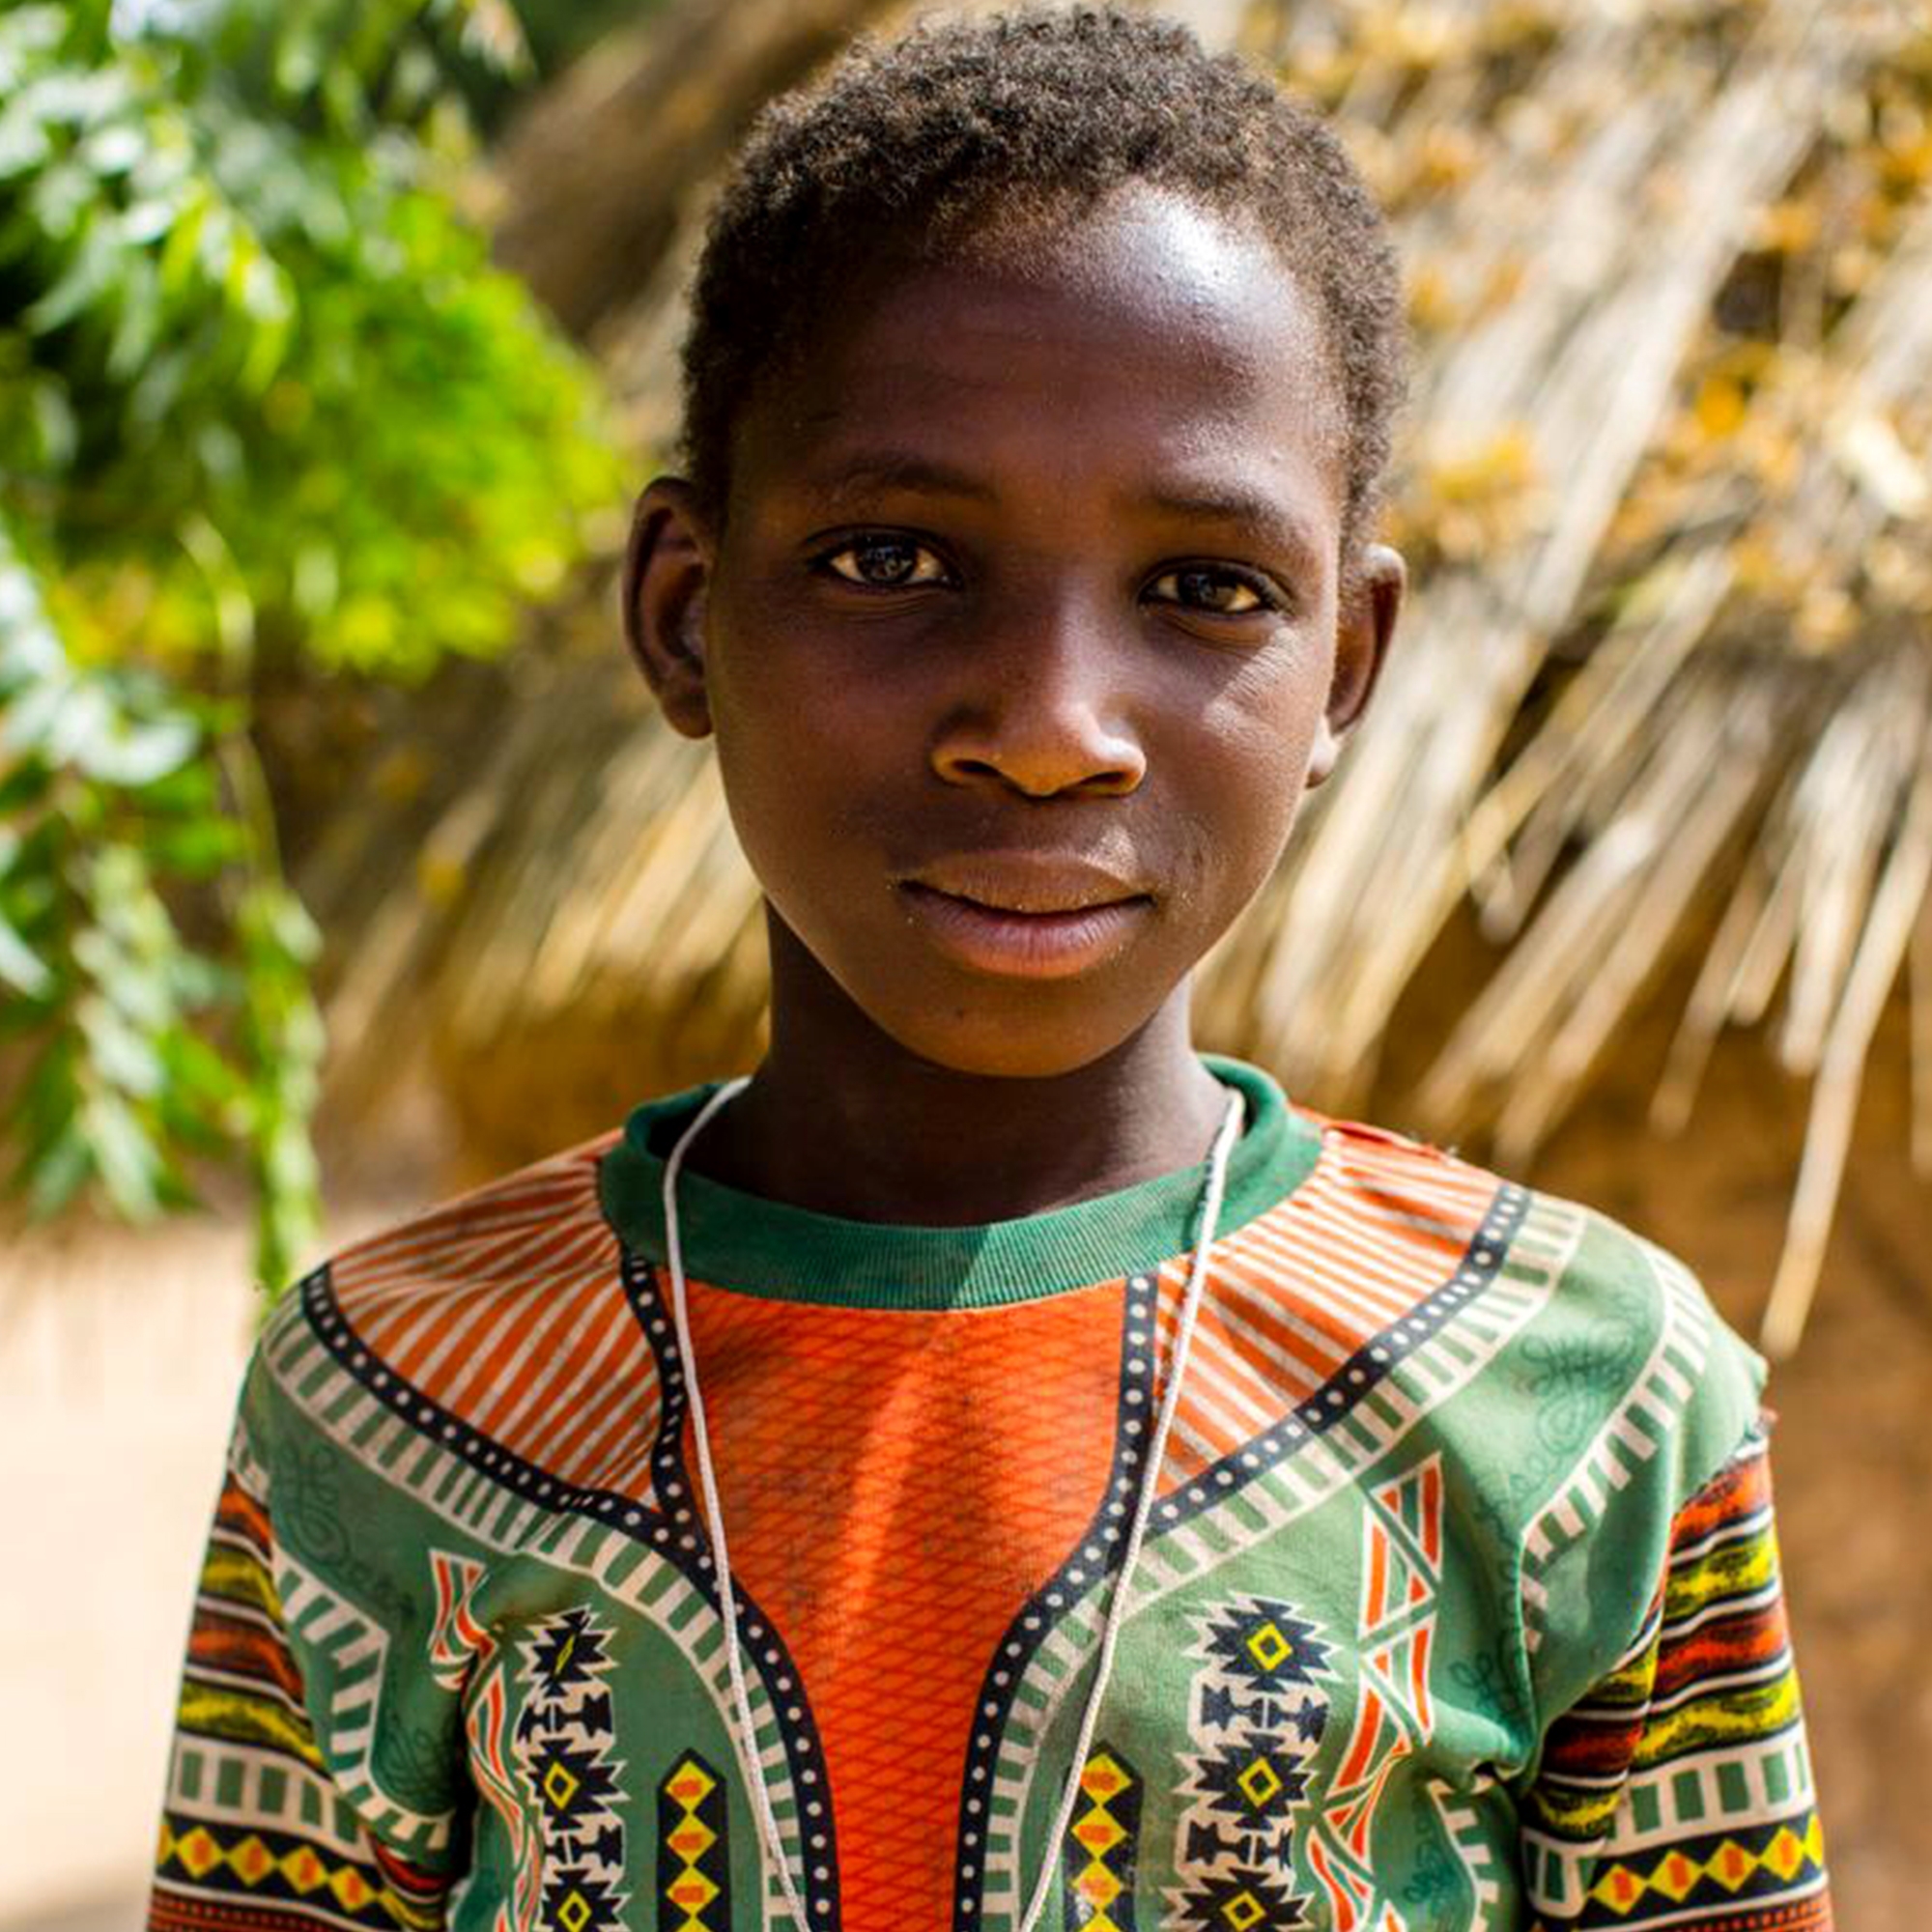 Stayabou is now able to attend school since his parents are aware of the importance of education. Photo Credit: Save the Children in Niger